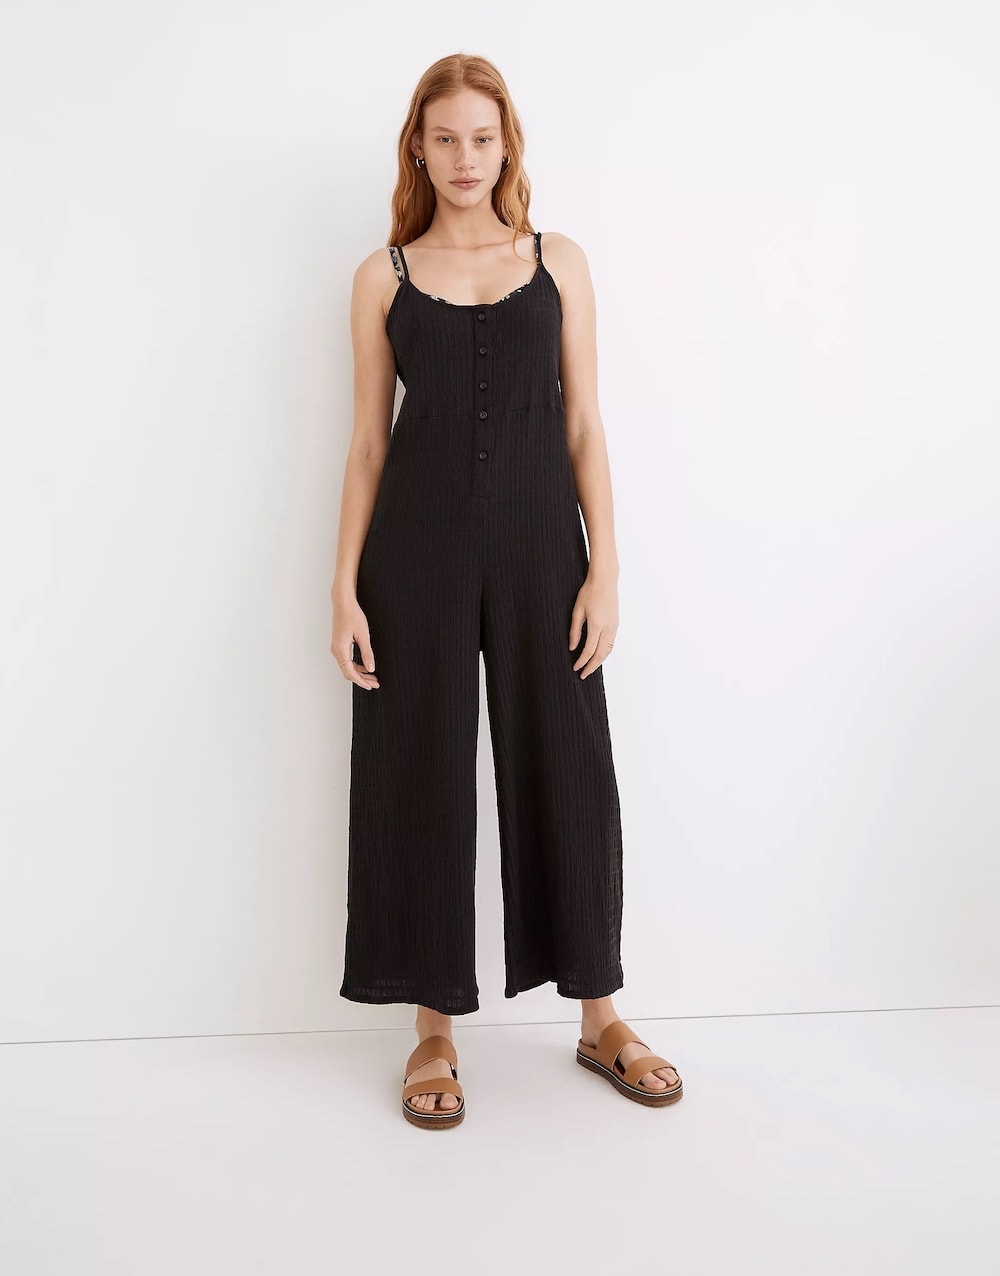 madewell - stores similar to free people